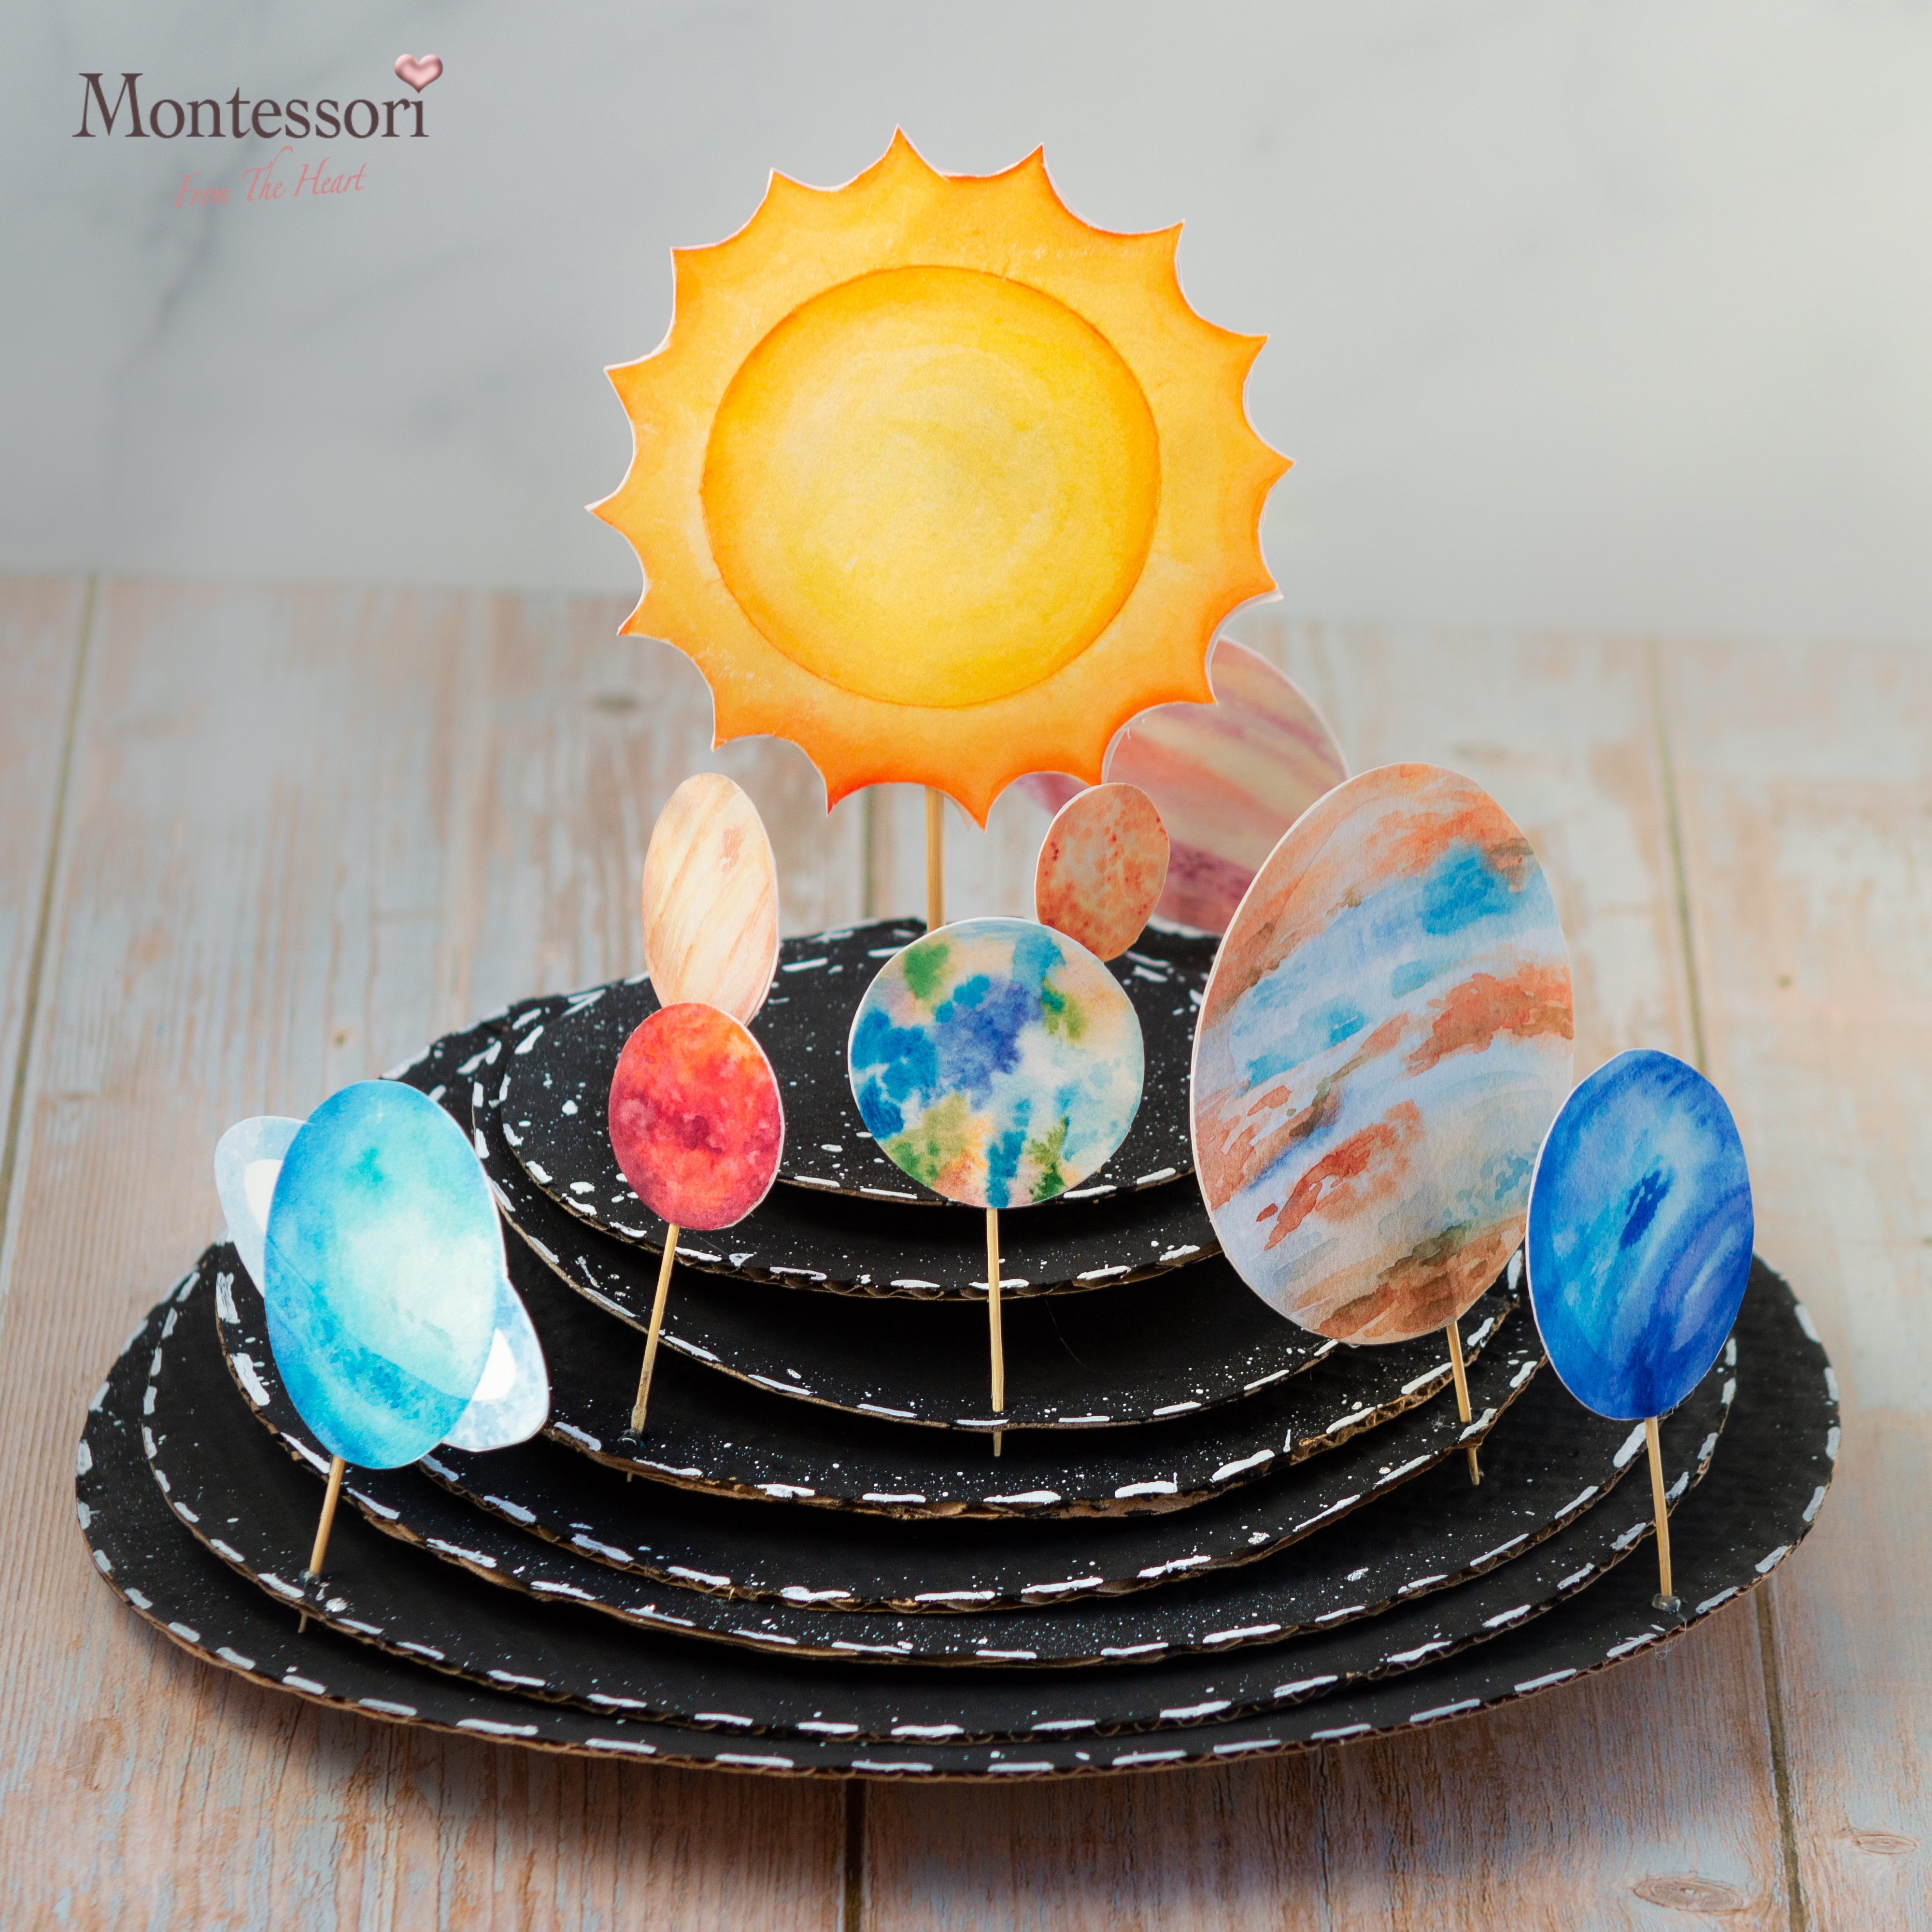 How to Make a Solar System Model at Home for a School Project